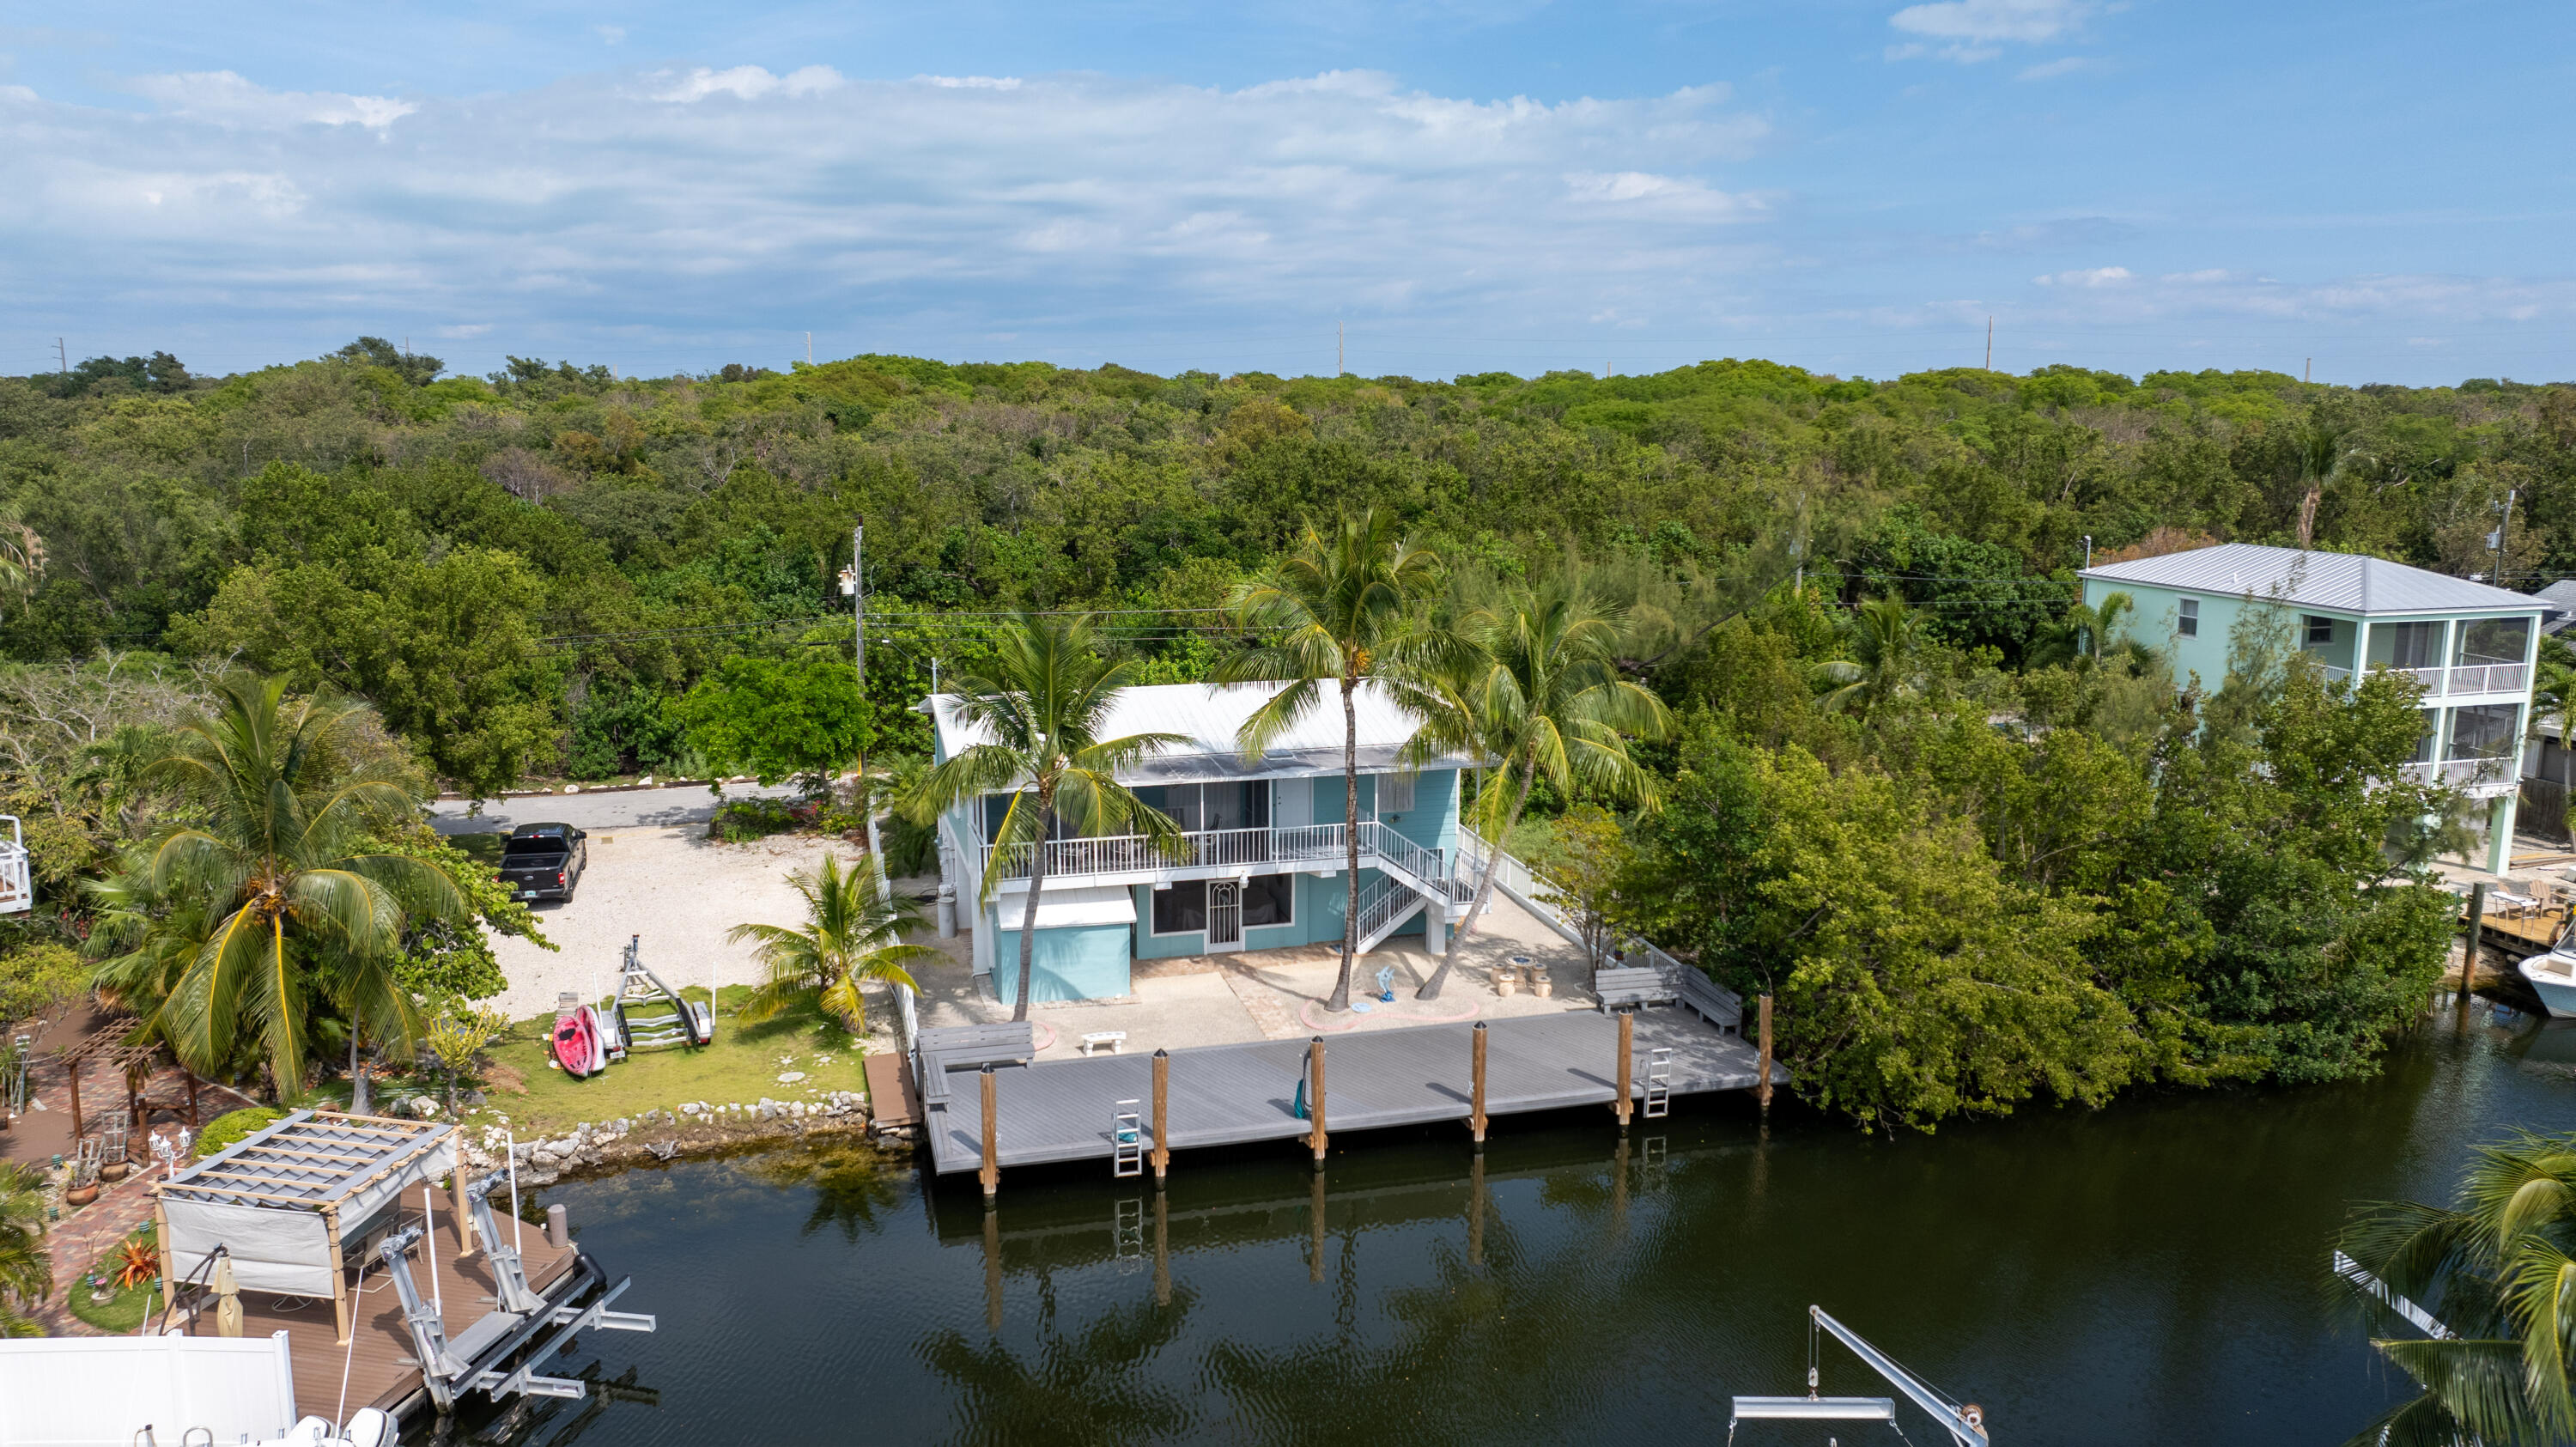 23 Harbor Drive, Key Largo, Florida, 33037, United States, 3 Bedrooms Bedrooms, ,3 BathroomsBathrooms,Residential,For Sale,23 Harbor Drive,1509507